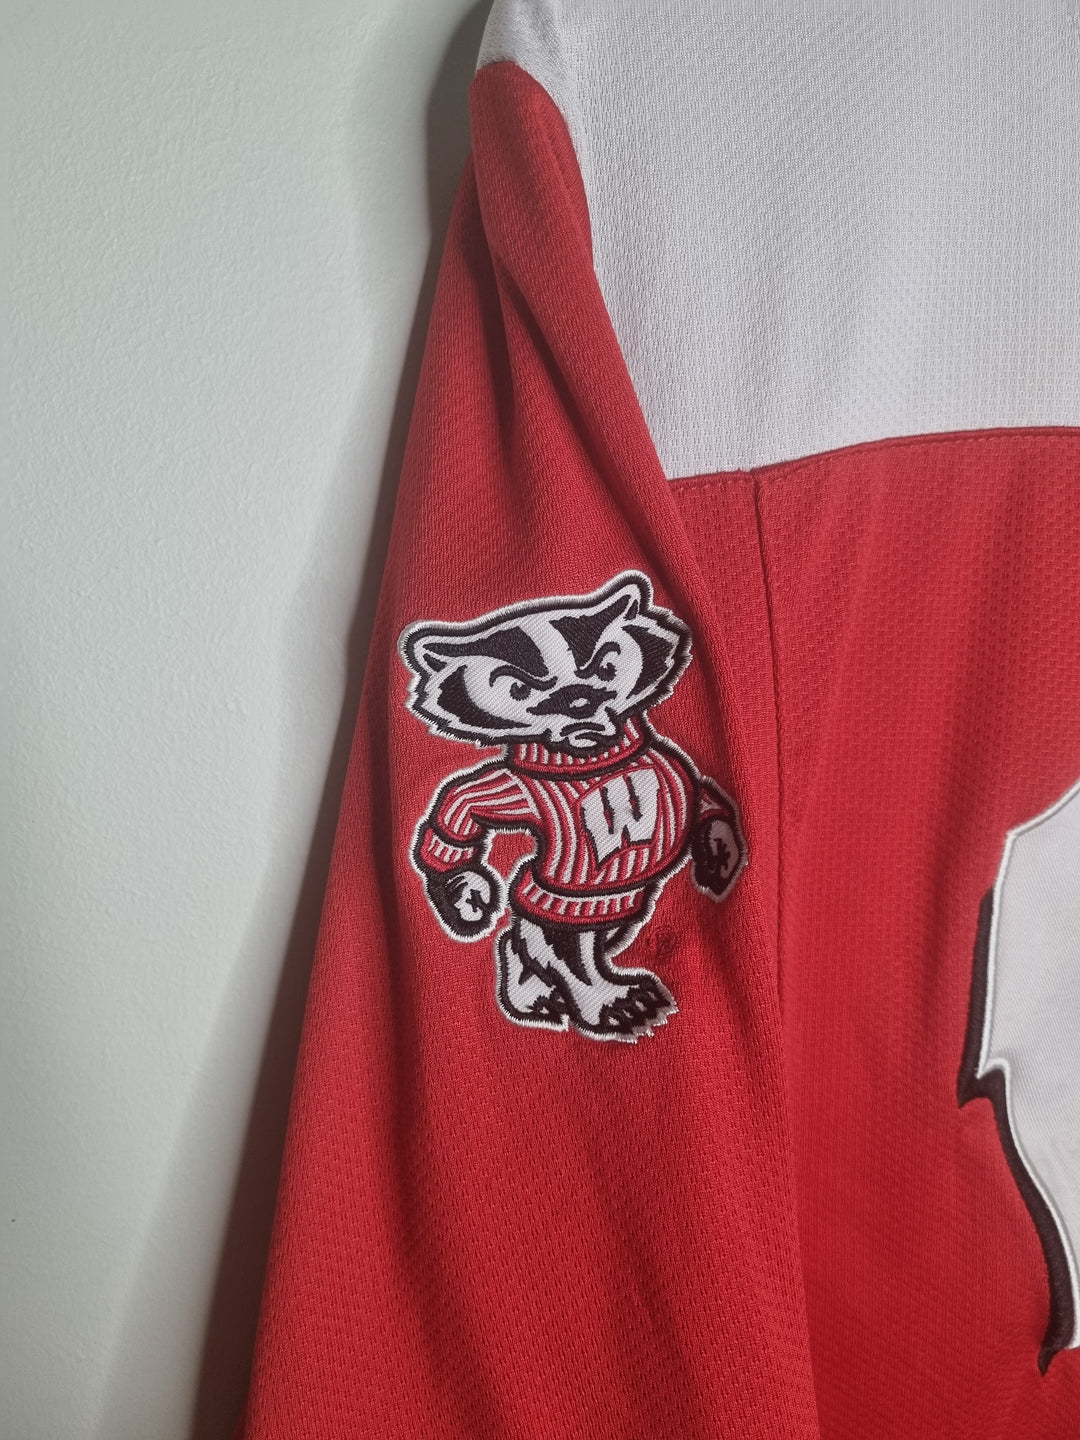 Wisconsin Badgers Small